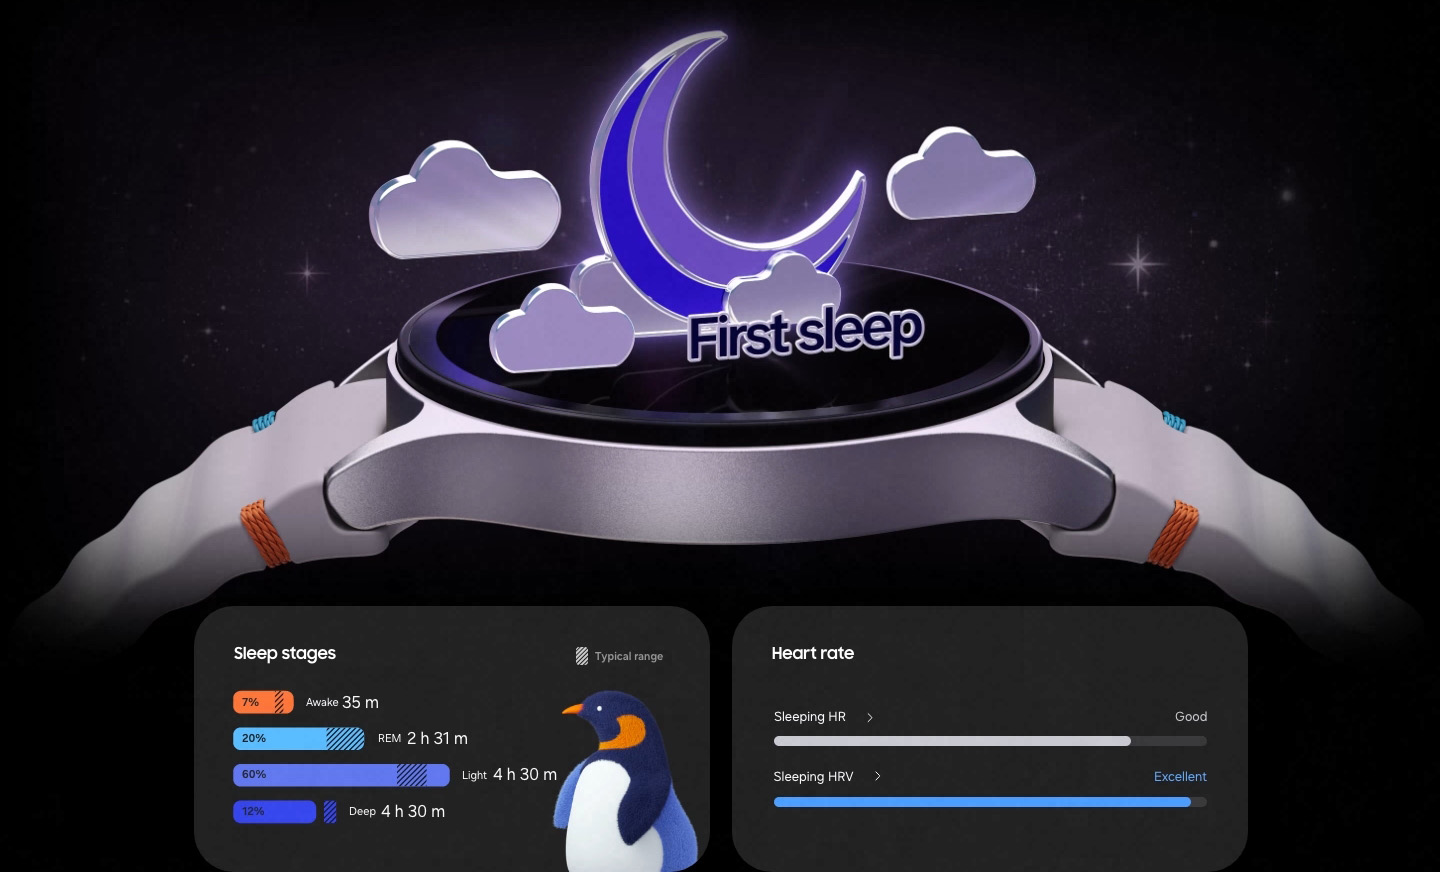 A Galaxy Watch7 is facing upward with animated clouds hovering over the screen and a crescent moon appearing with a text 'First sleep', illustrating the importance of sleep tracking. Below are two cards with sleep metrics, one for sleep stages with bar graphs for Awake, REM, Light and Deep and the other one for heart rate showing bar graphs for Sleeping HR and Sleeping HRV.